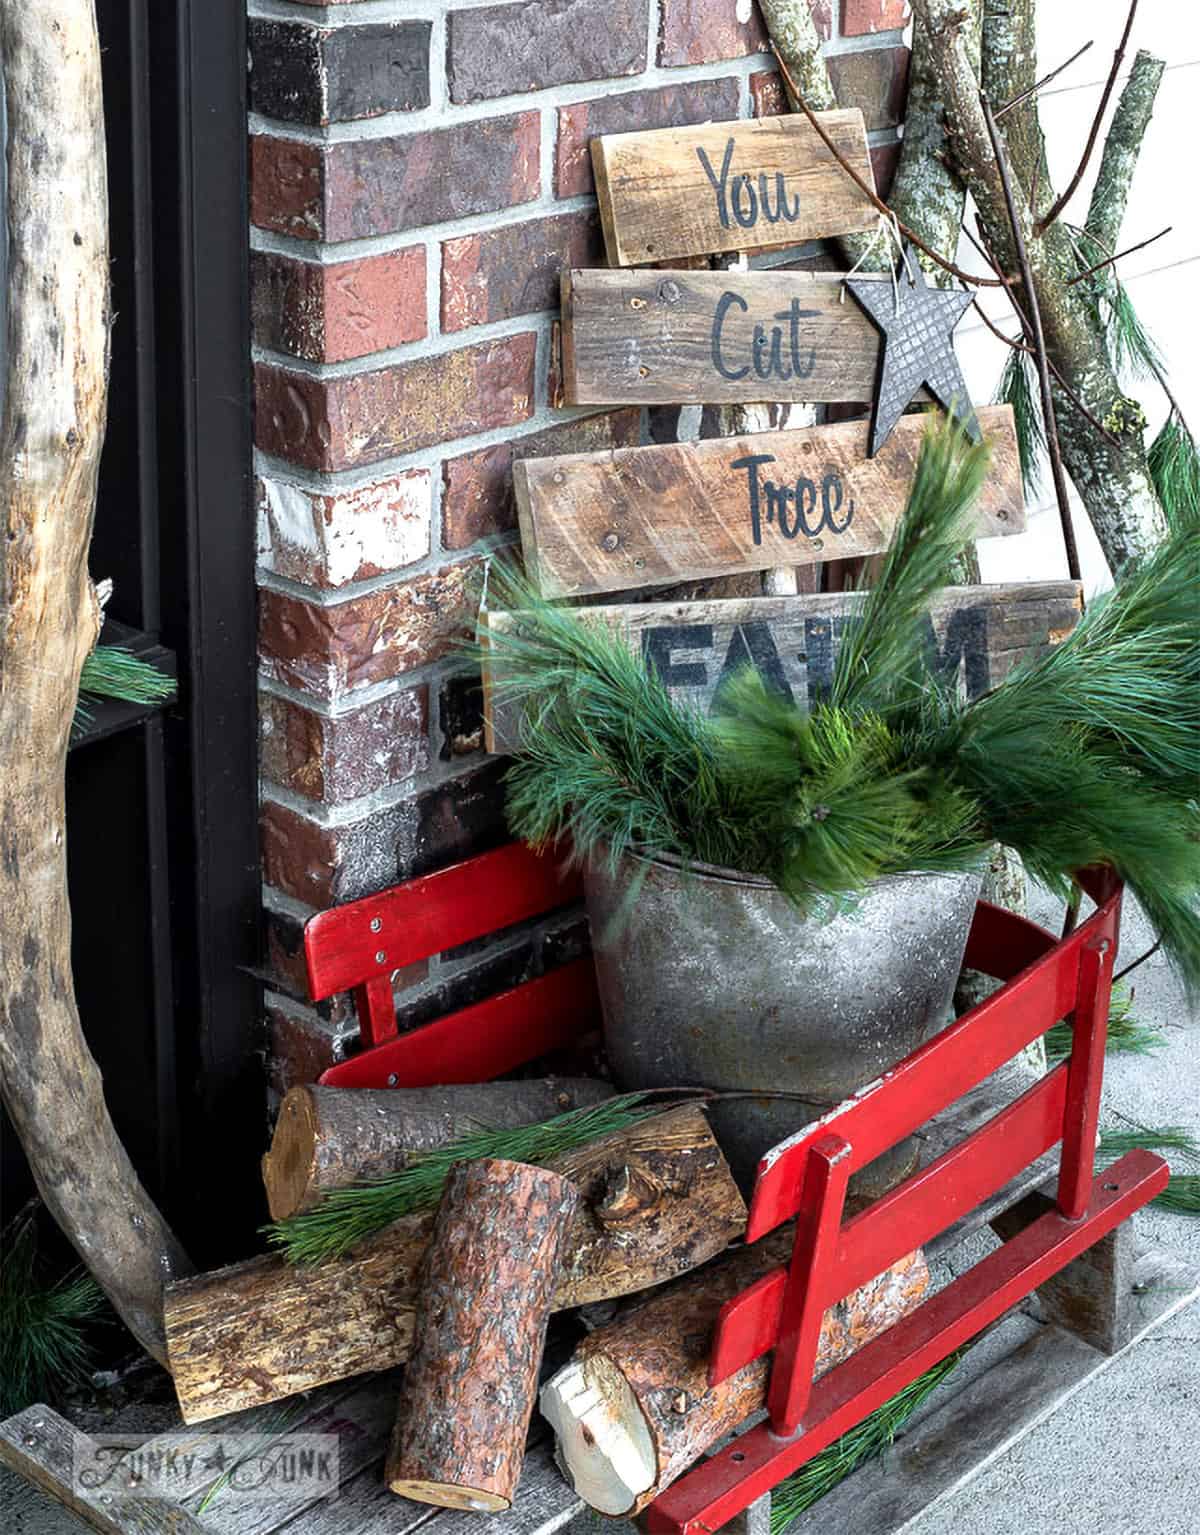 Porch Christmas tree farm sign in a red sleigh and pine branches.